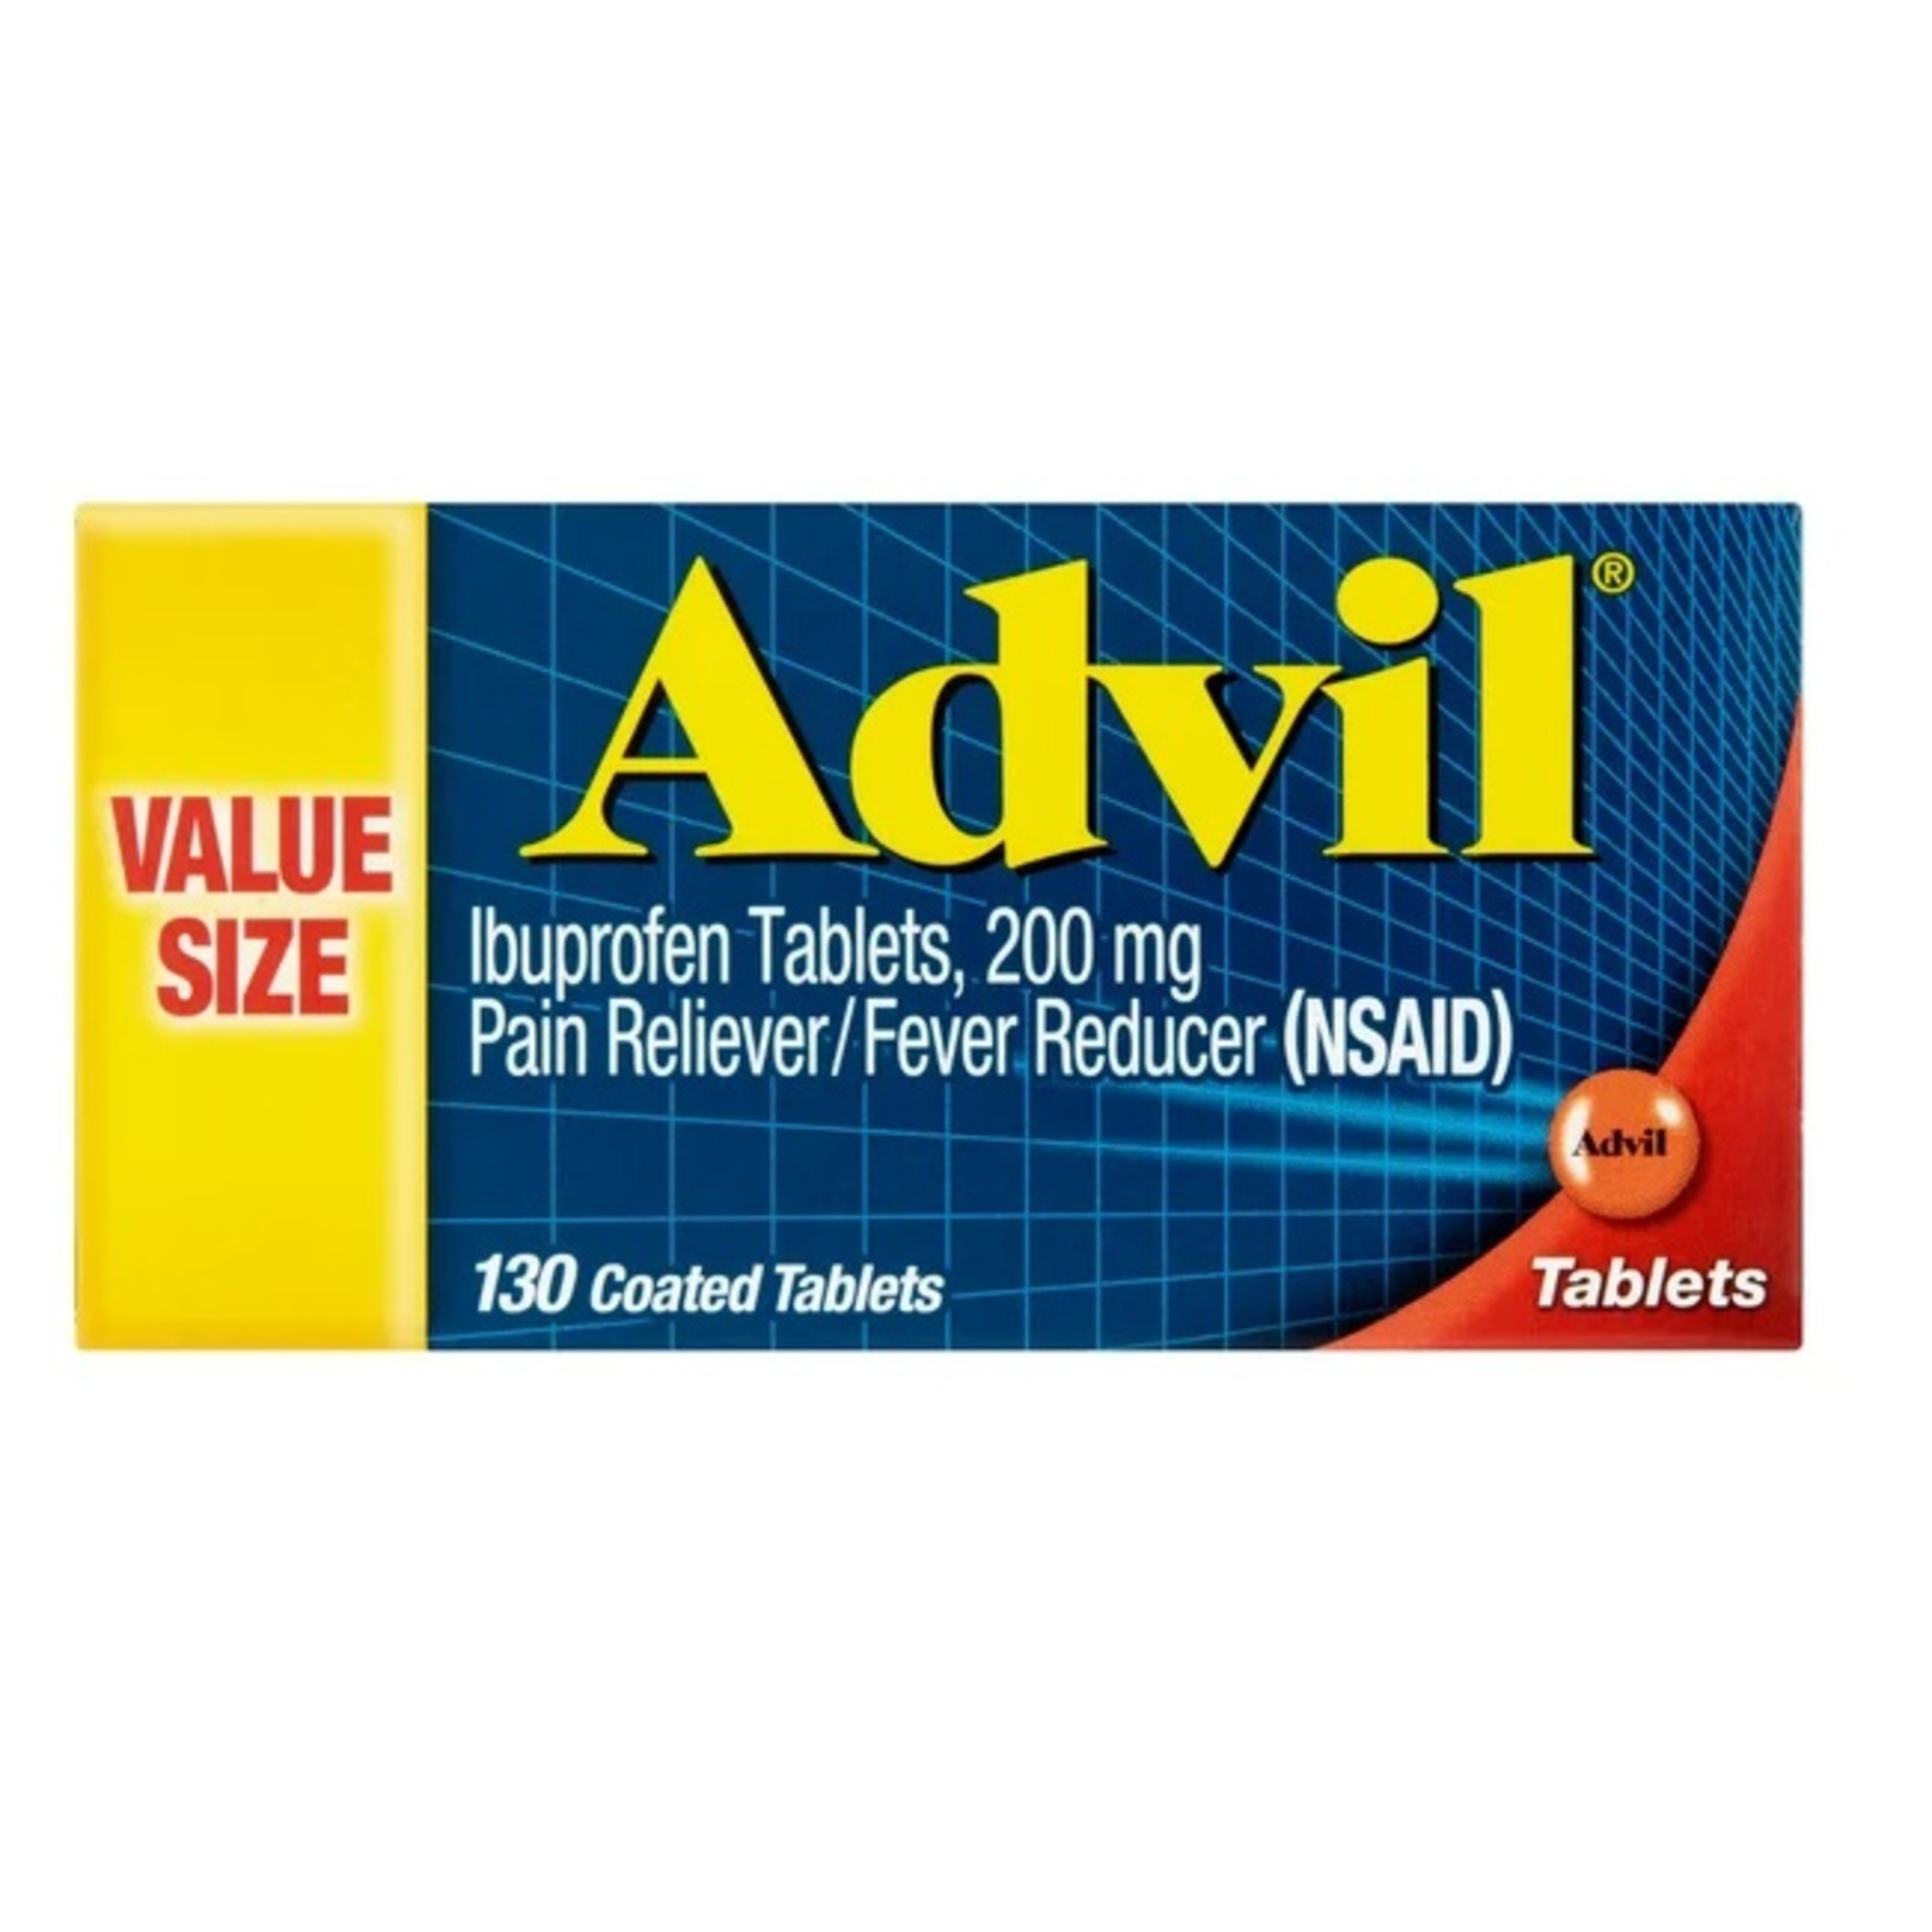 Advil Pain and Headache Reliever Ibuprofen, 200 mg Coated Tablets, 130 Count - image 1 of 8